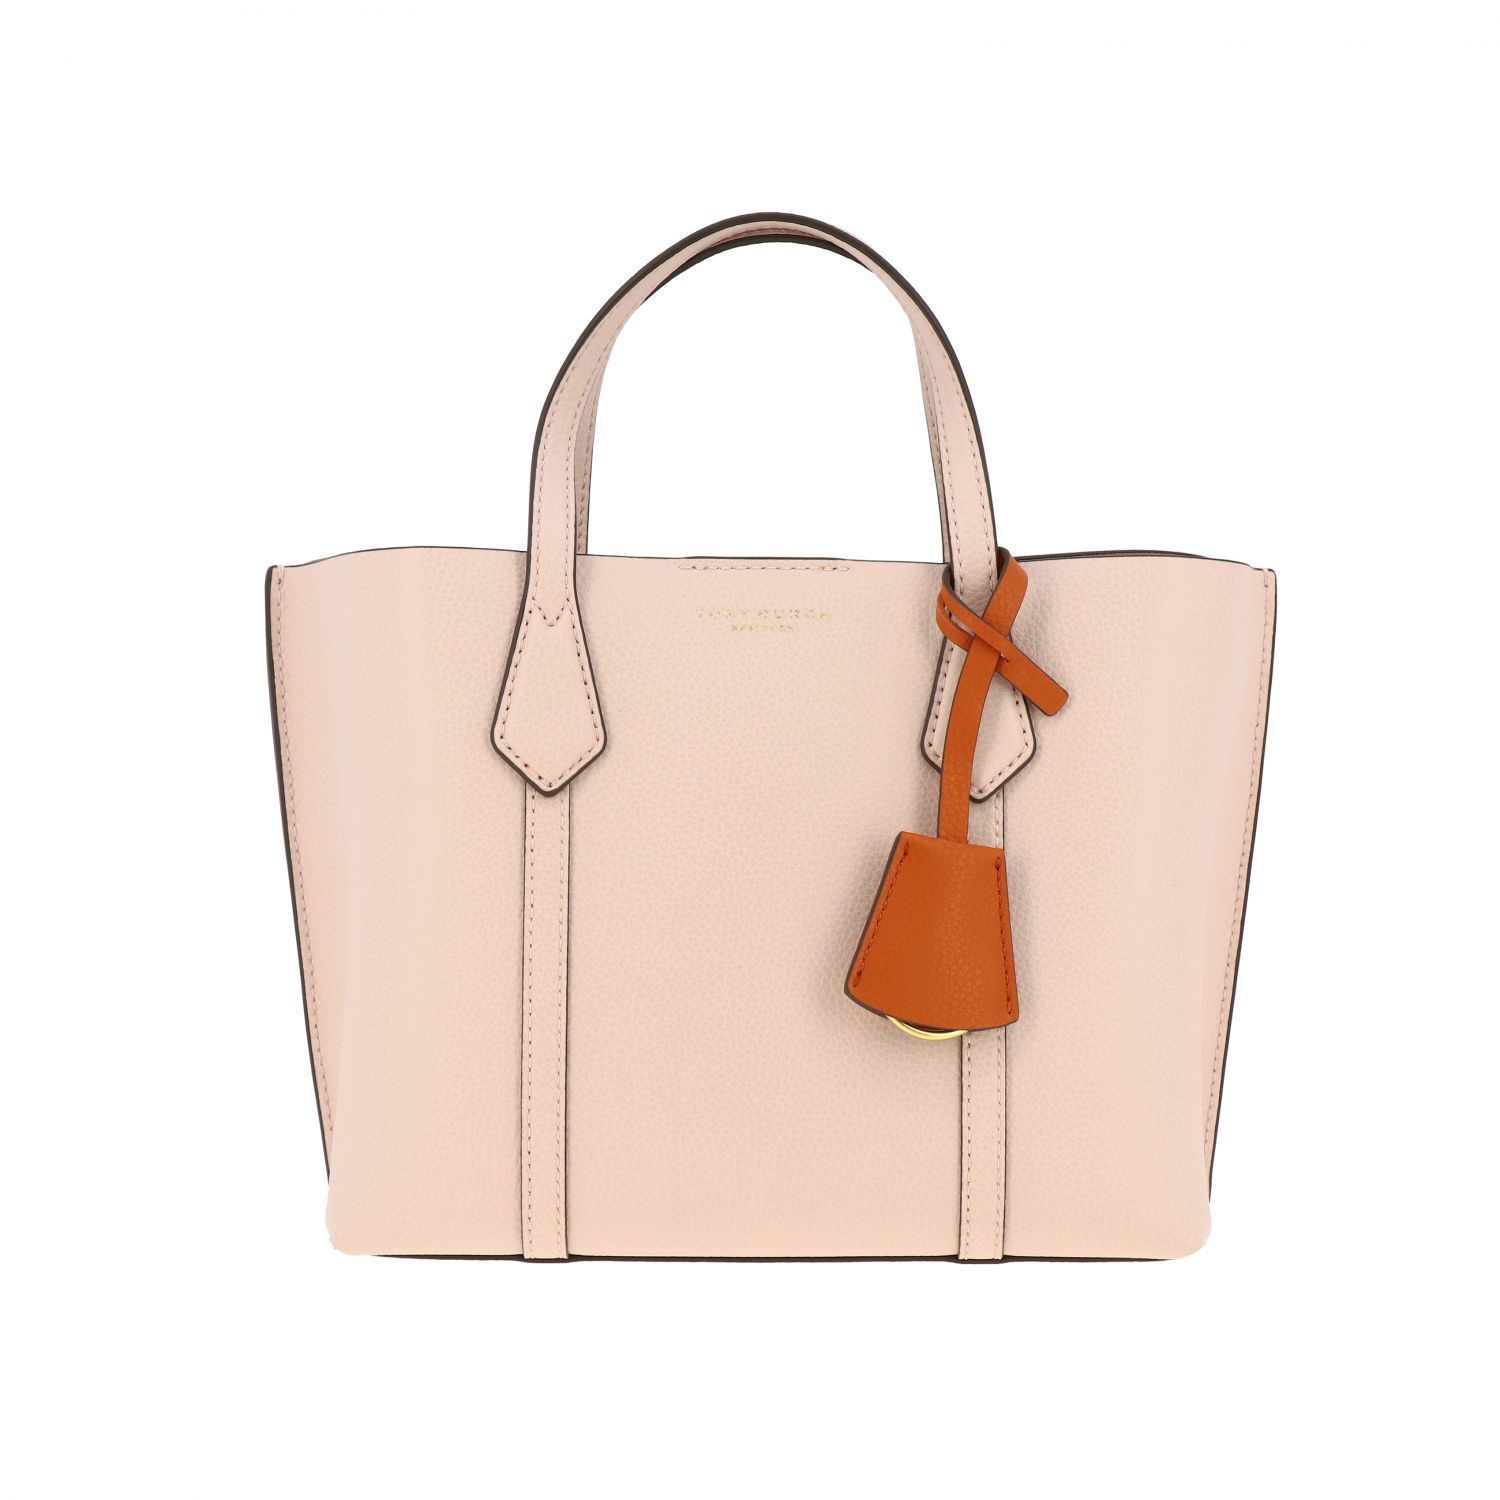 Tory Burch Outlet: tote bag in leather with logo - Pink | Tory Burch tote  bags 56249 online on 